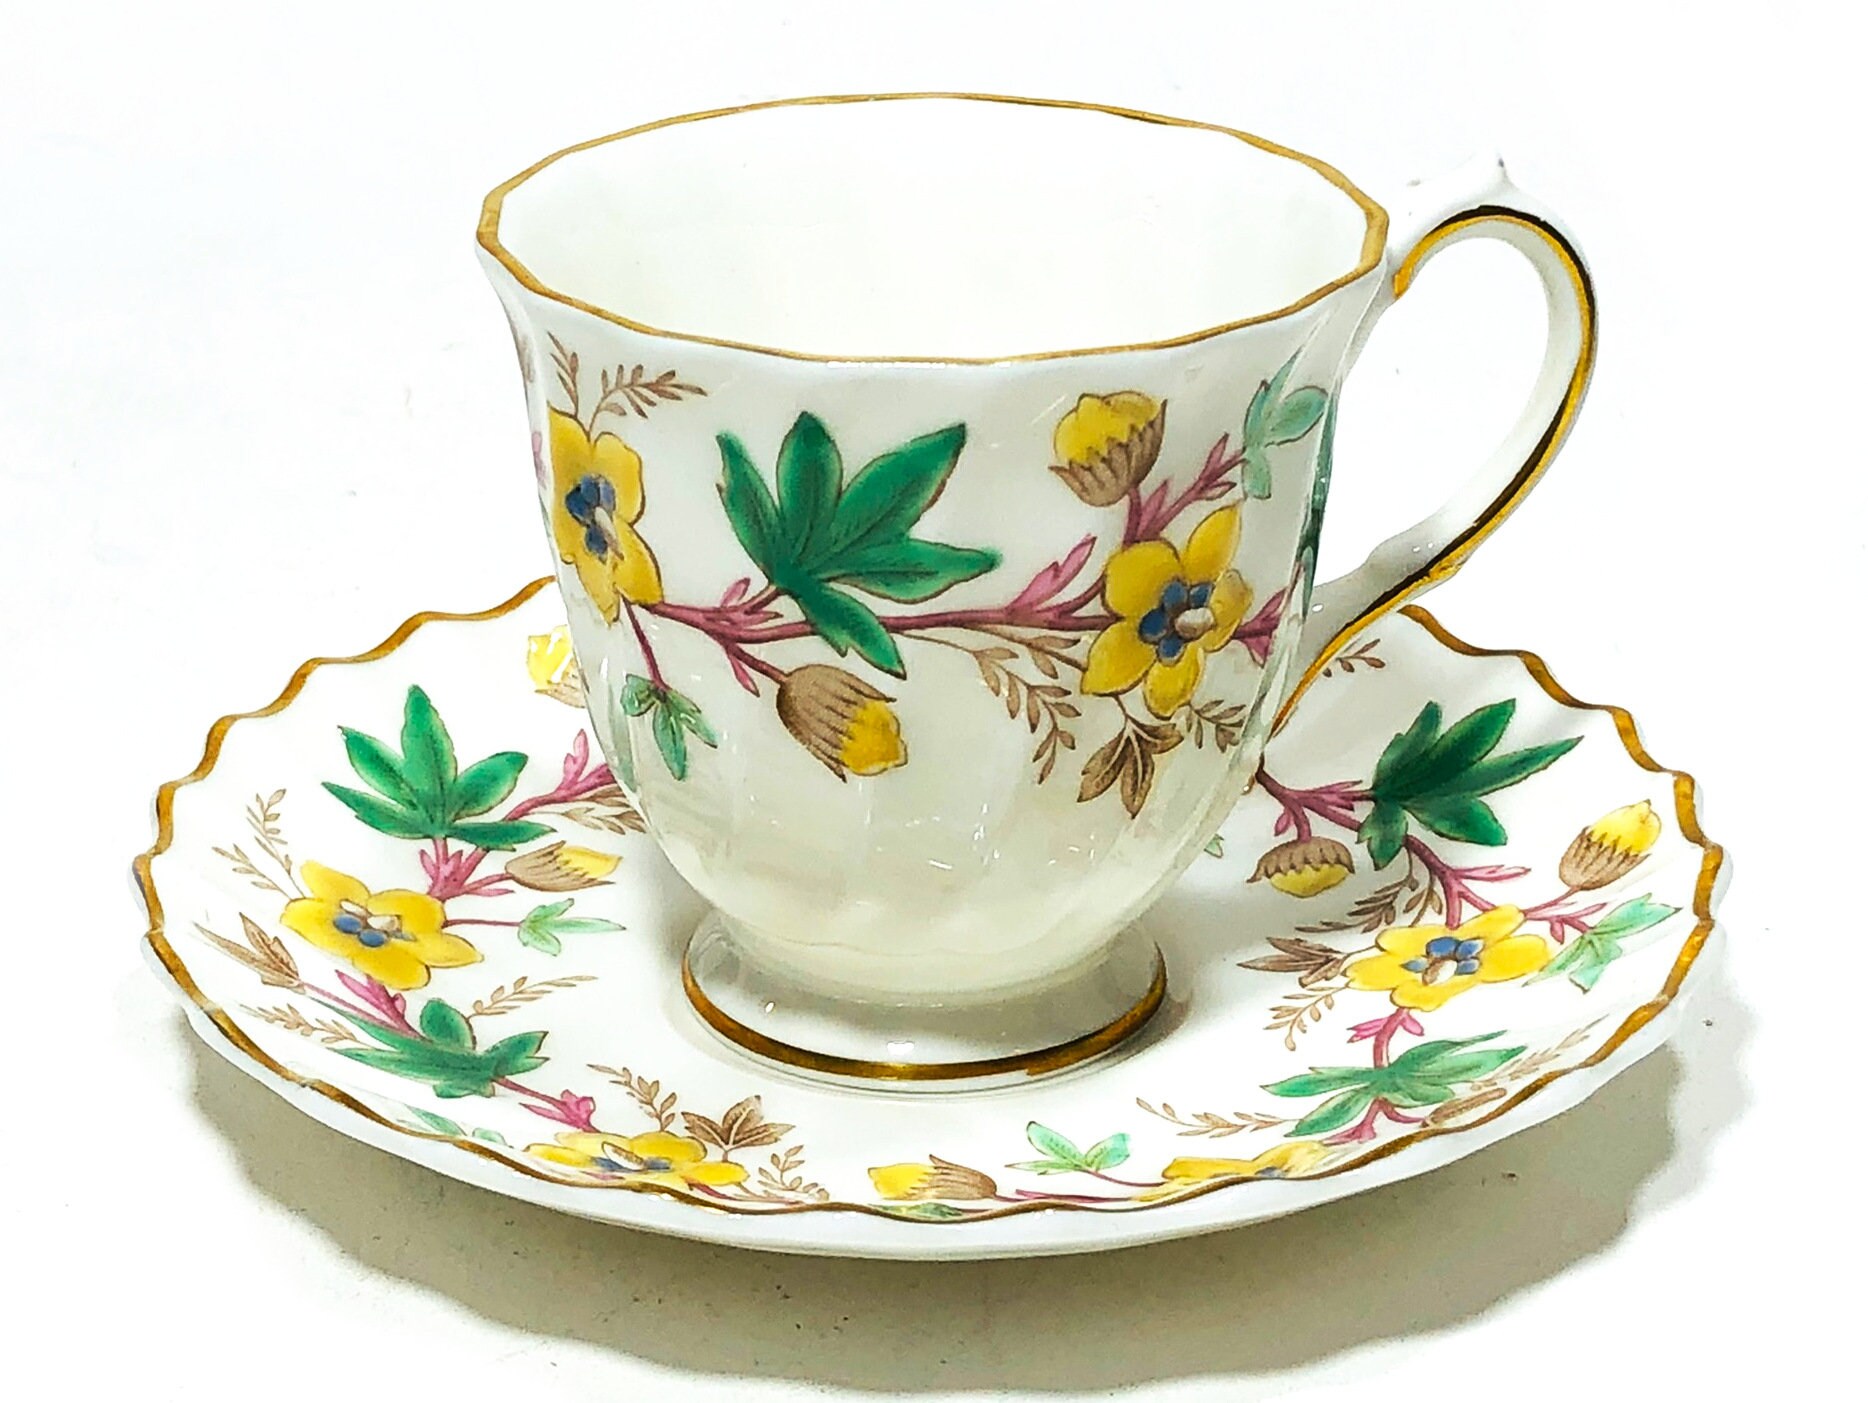 3 Royal Doulton Medford Demitasse Cups And Saucers Creamware 1930s Hand  Colored